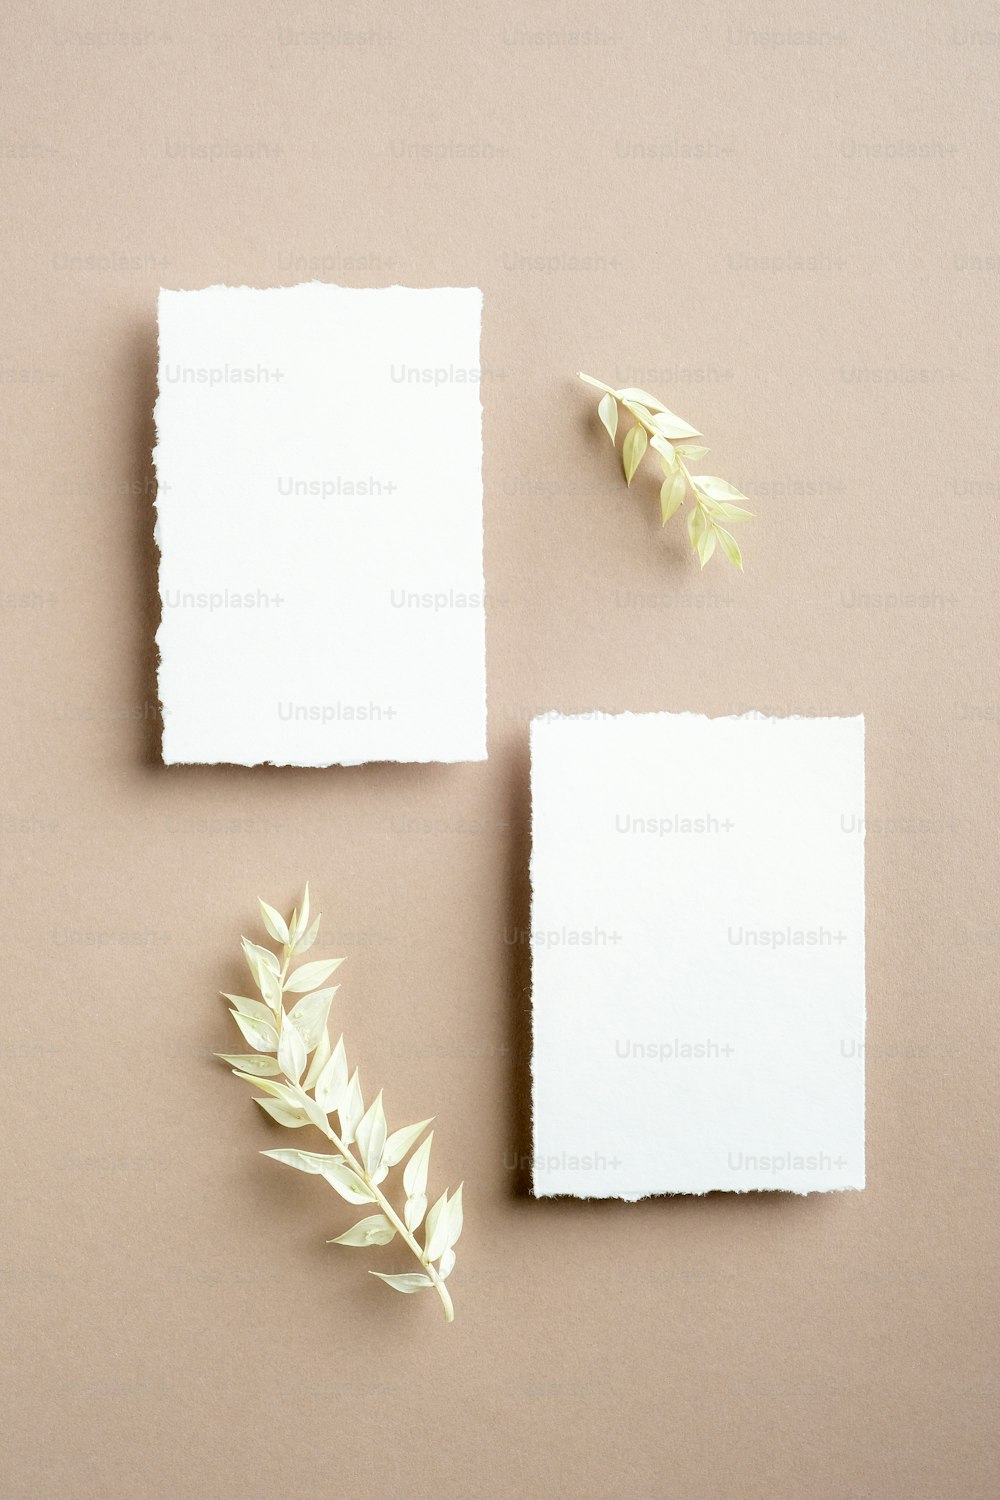 Blank invitation cards. Flat lay, top view. Empty white wedding stationery mockups with dried leaves on pastel beige background.